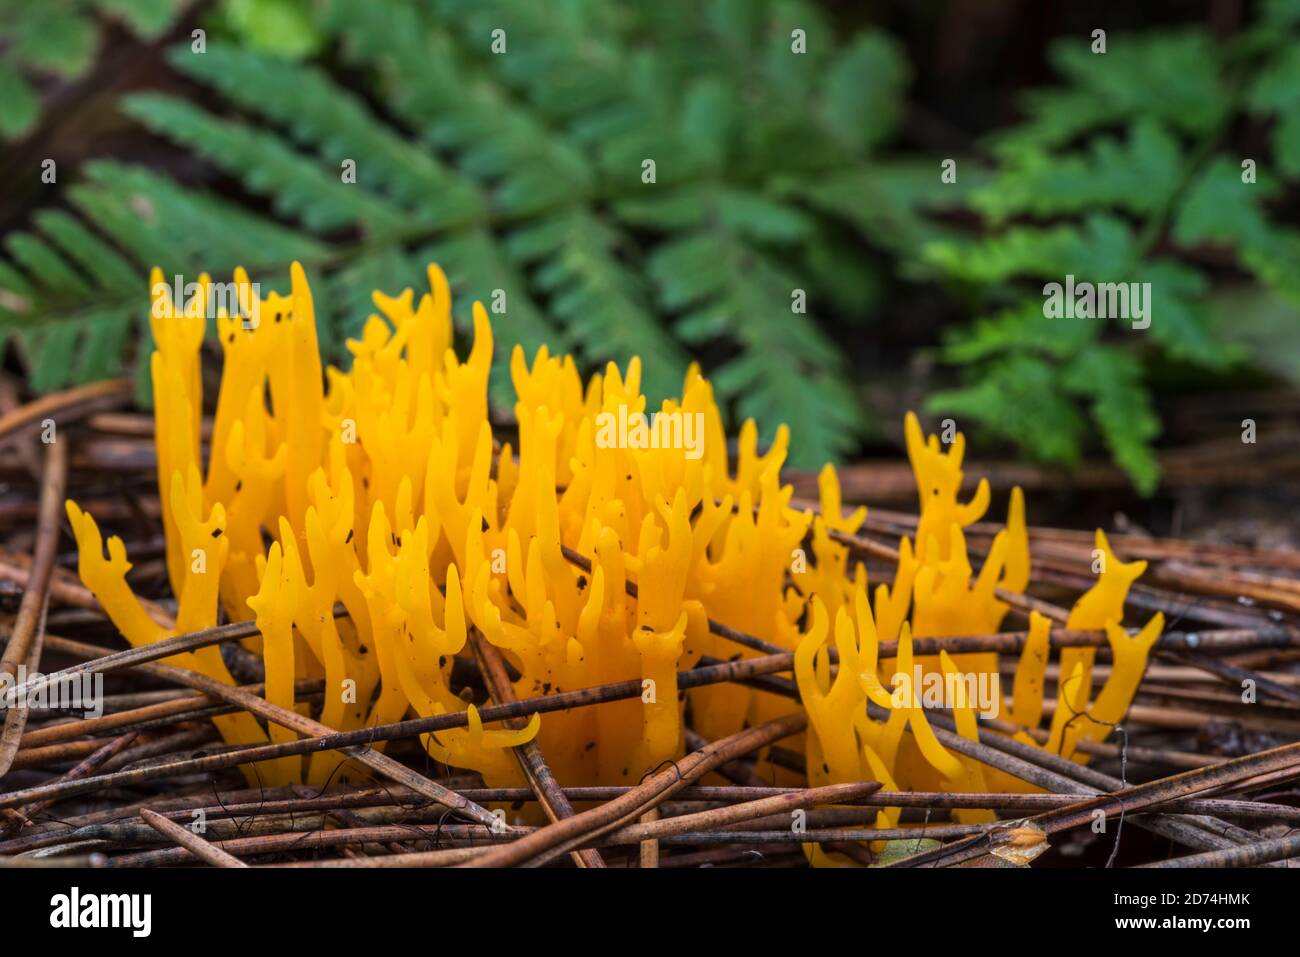 Yellow stagshorn (Calocera viscosa), jelly fungus showing branching basidiocarps on the coniferous forest floor in autumn woodland Stock Photo